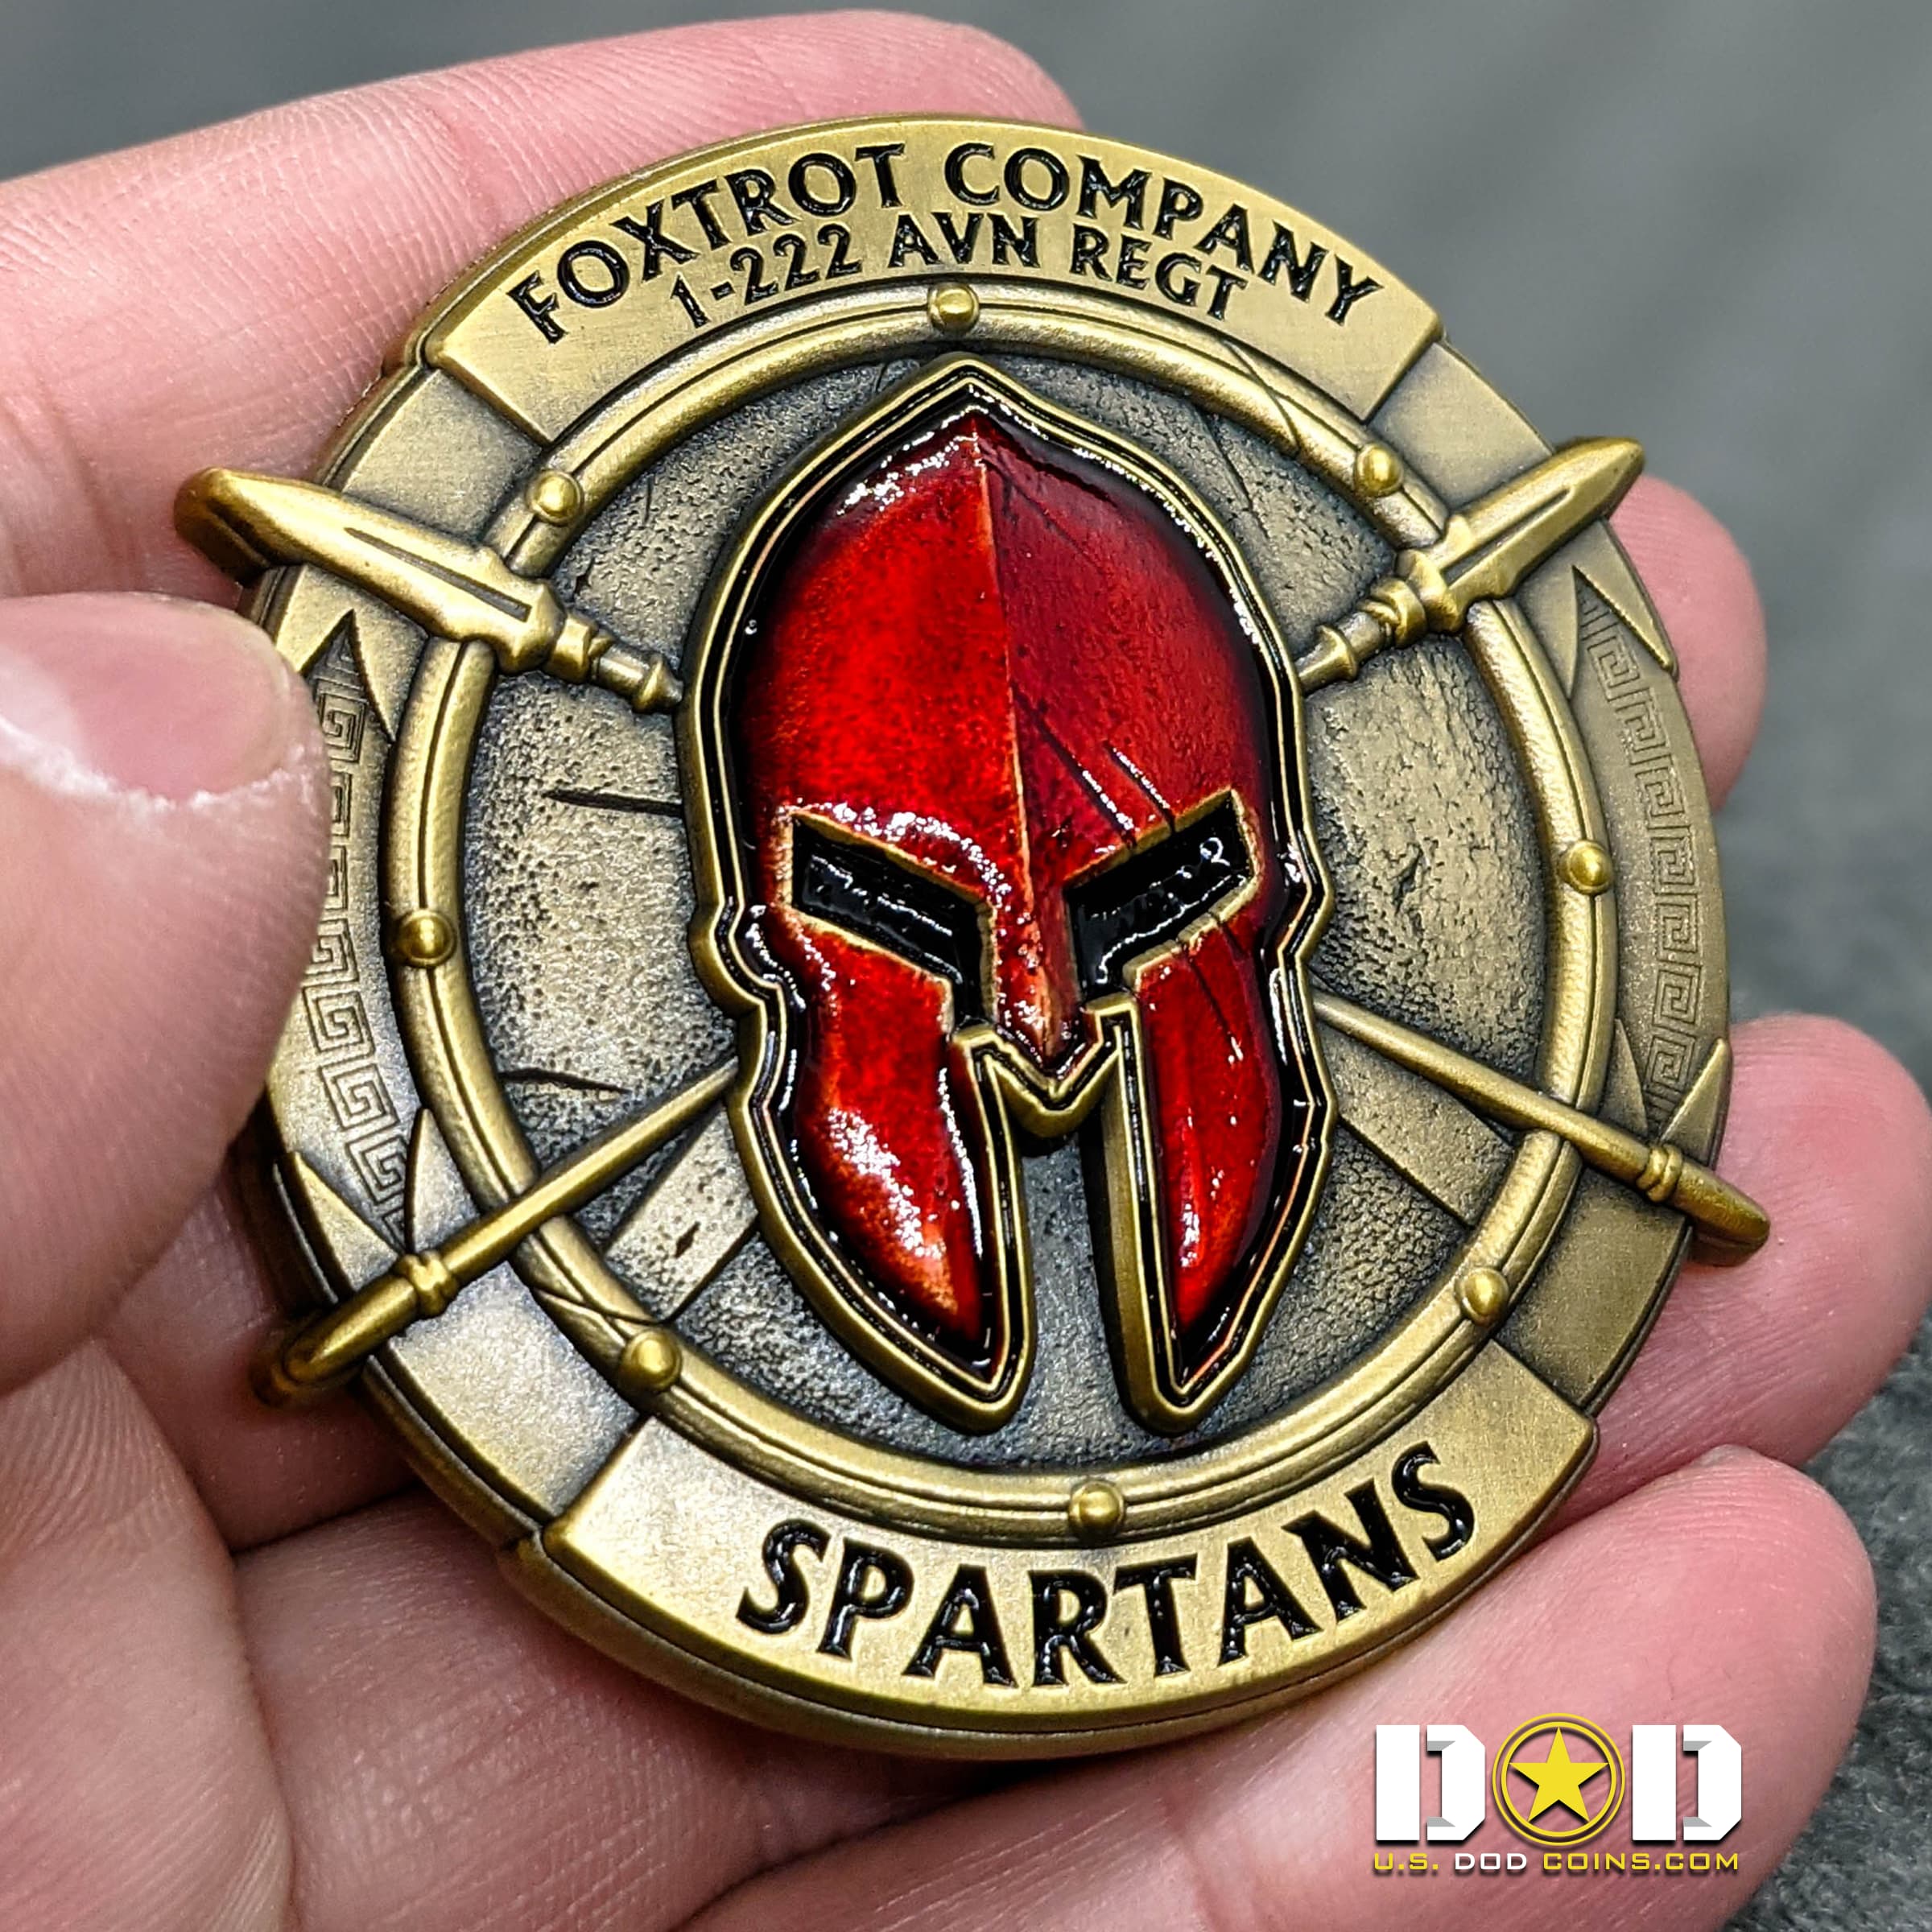 Foxtrot-Company-Spartan-Challenge-Coin_0003_USDODCoins-Challenge-Coins-Examples-93